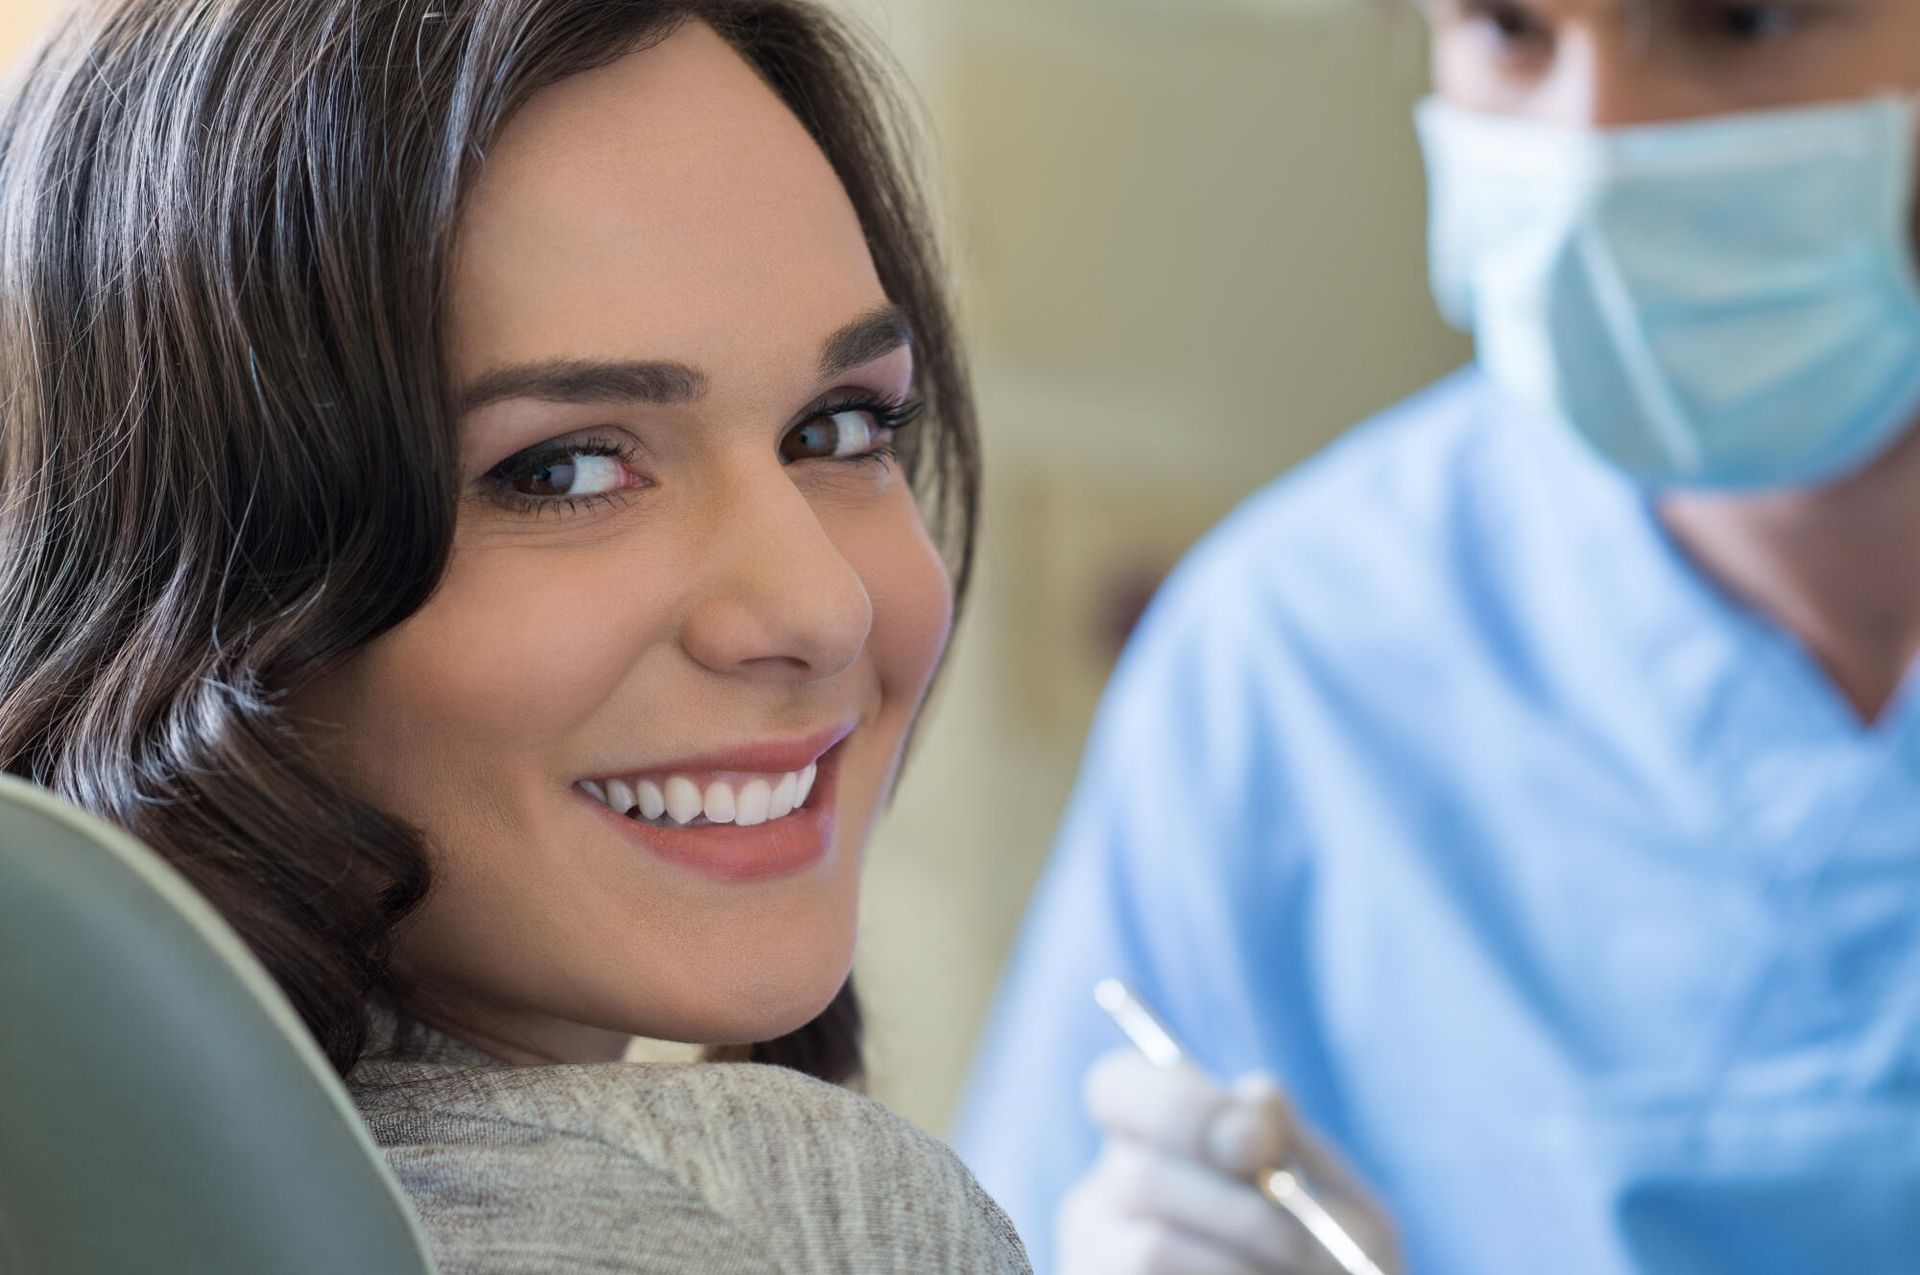 A woman is smiling while sitting in a dental chair.